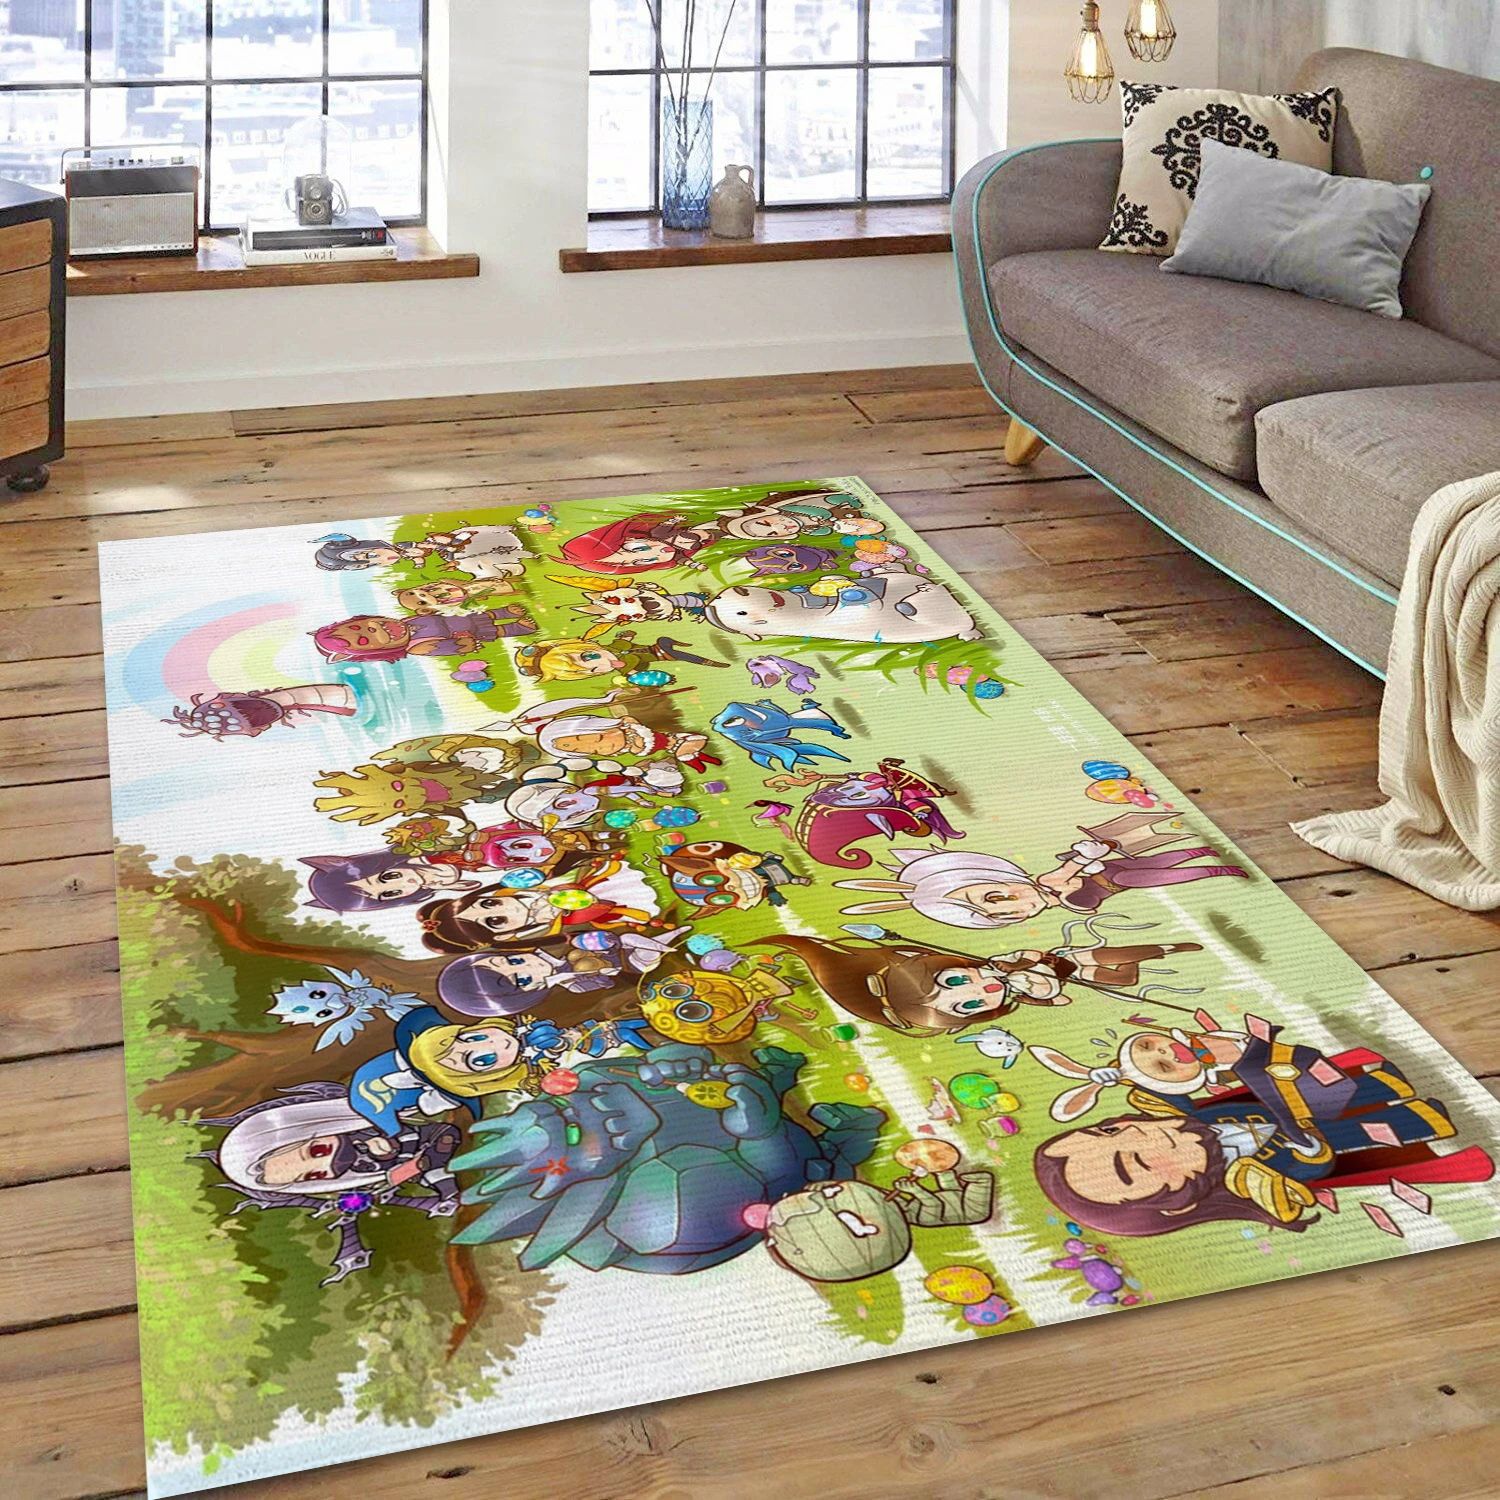 Lux Ahri Teemo And Katarina League Of Legends Video Game Area Rug For Christmas, Area Rug - Christmas Gift Decor - Indoor Outdoor Rugs 1